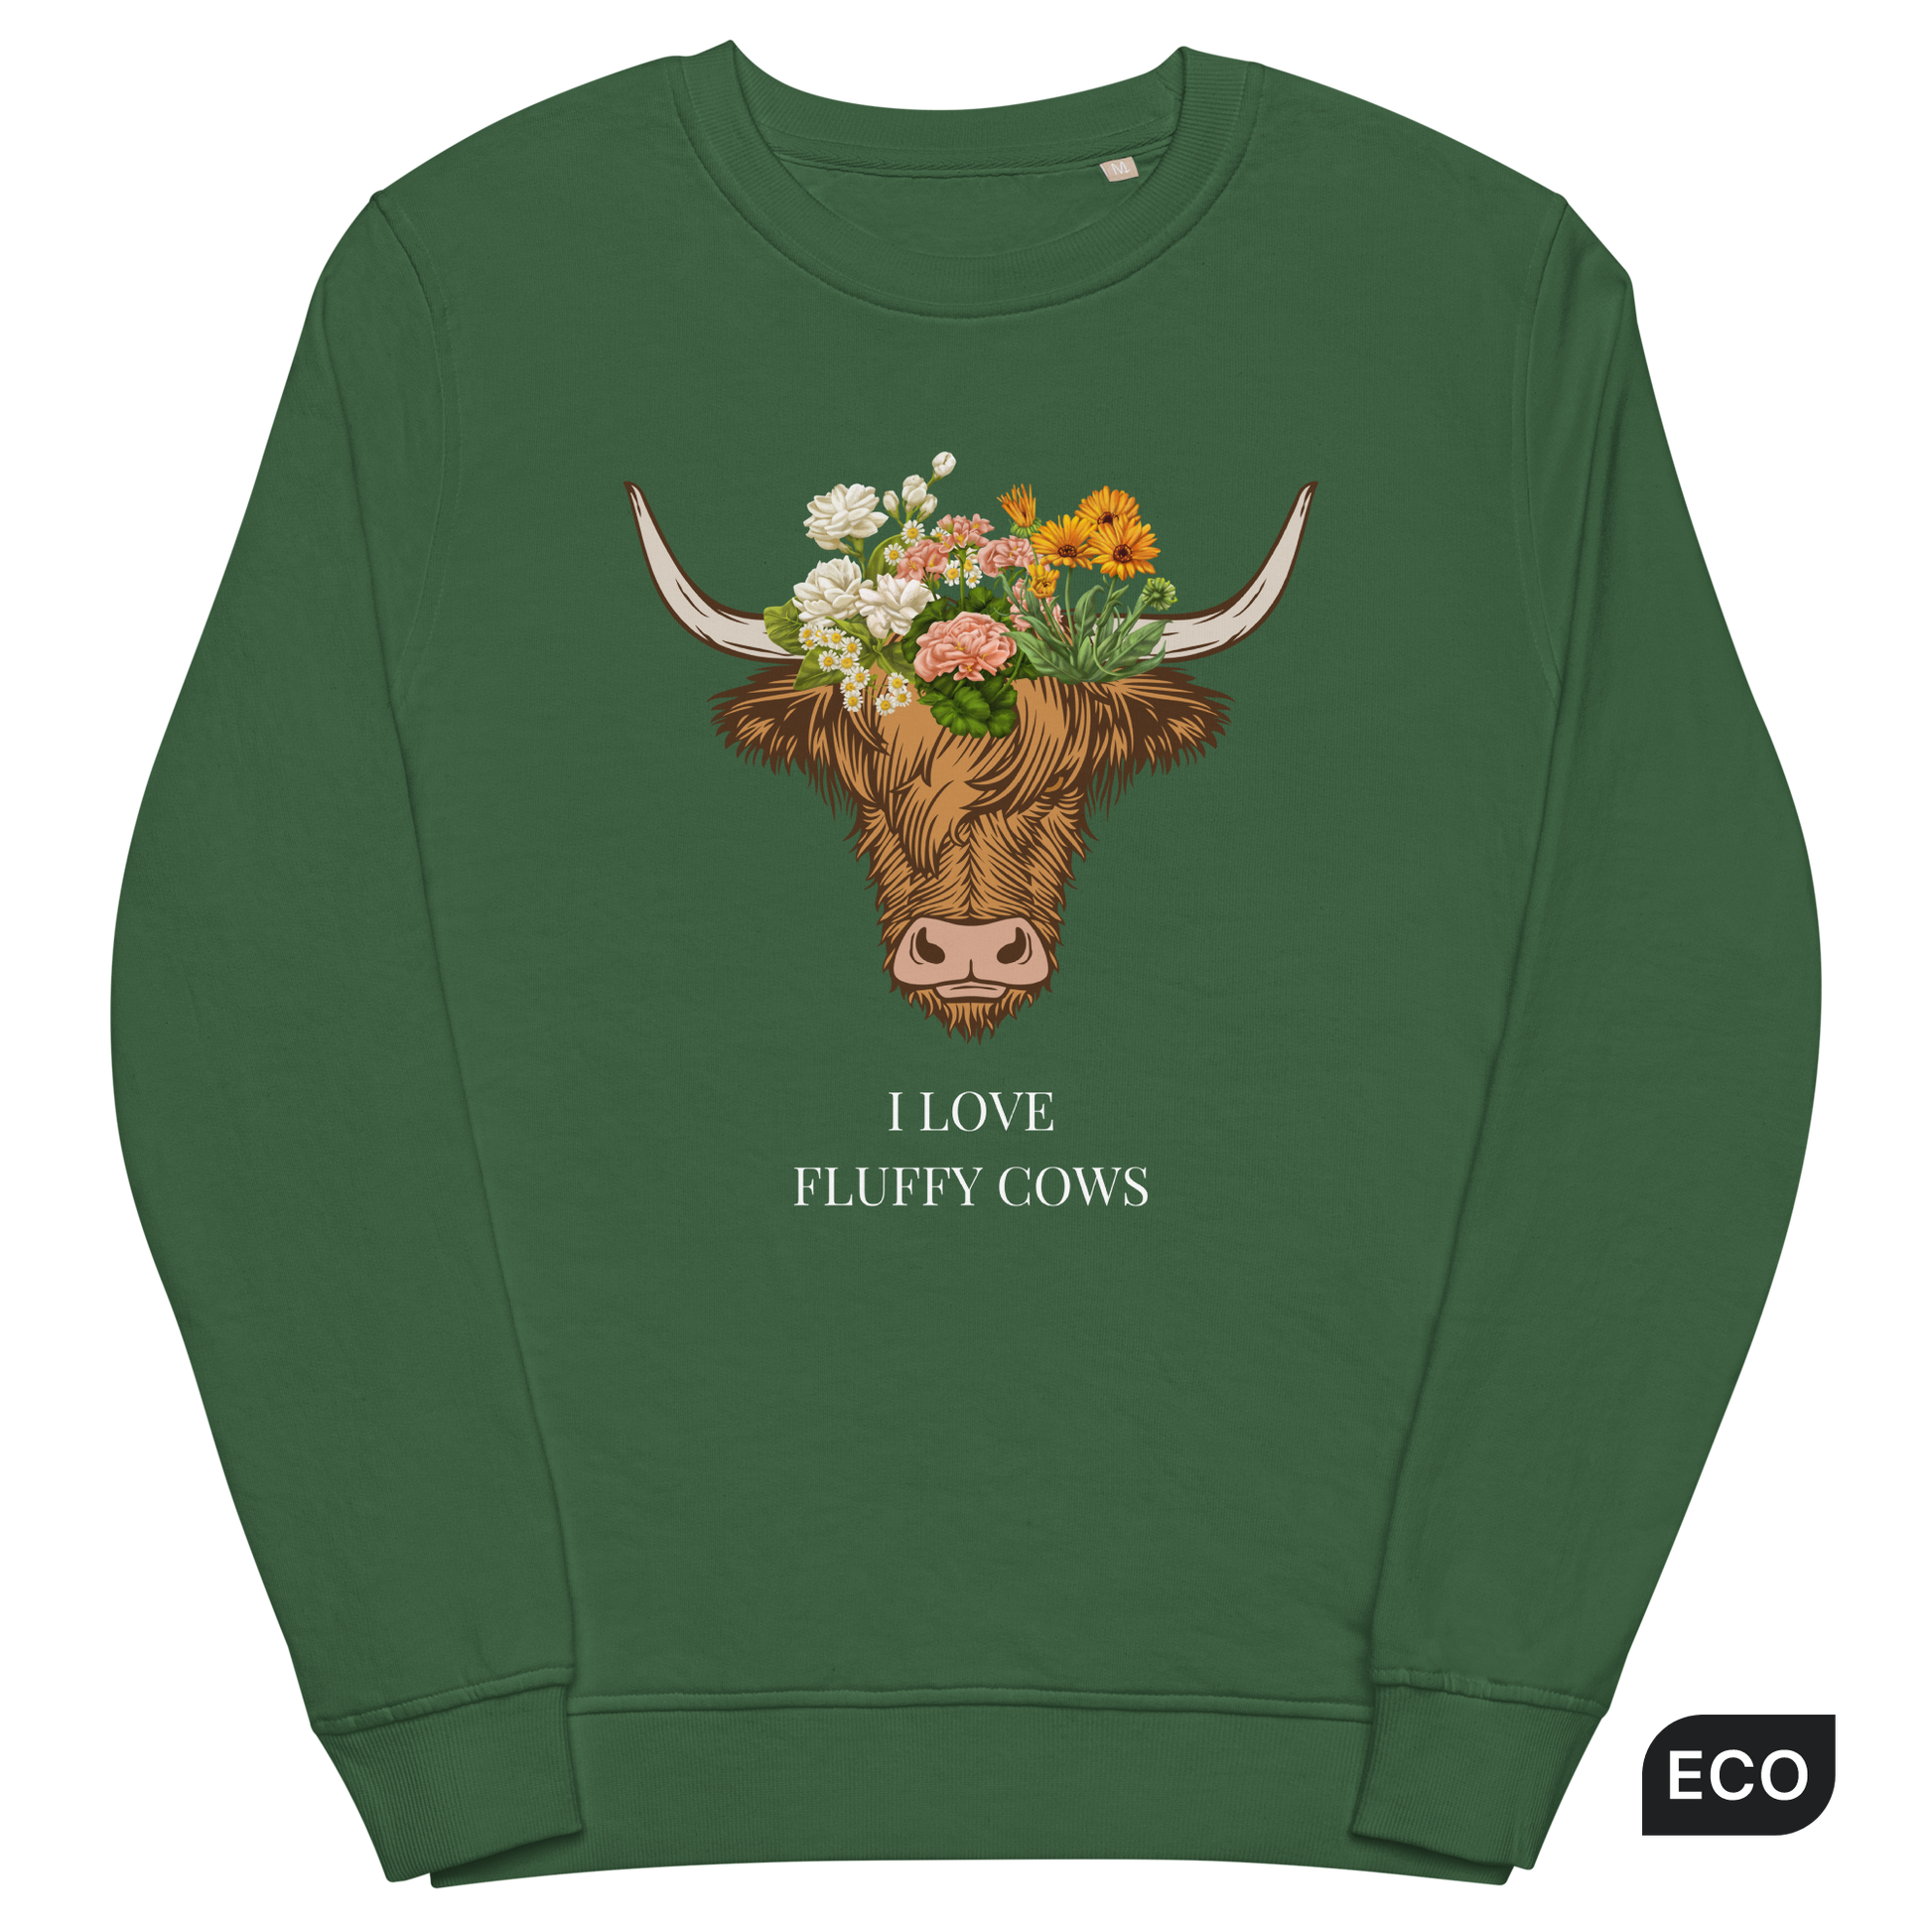 Bottle Green Organic Cotton Highland Cow Sweatshirt featuring an adorable I Love Fluffy Cows graphic on the chest - Cute Graphic Highland Cow Sweatshirts - Boozy Fox